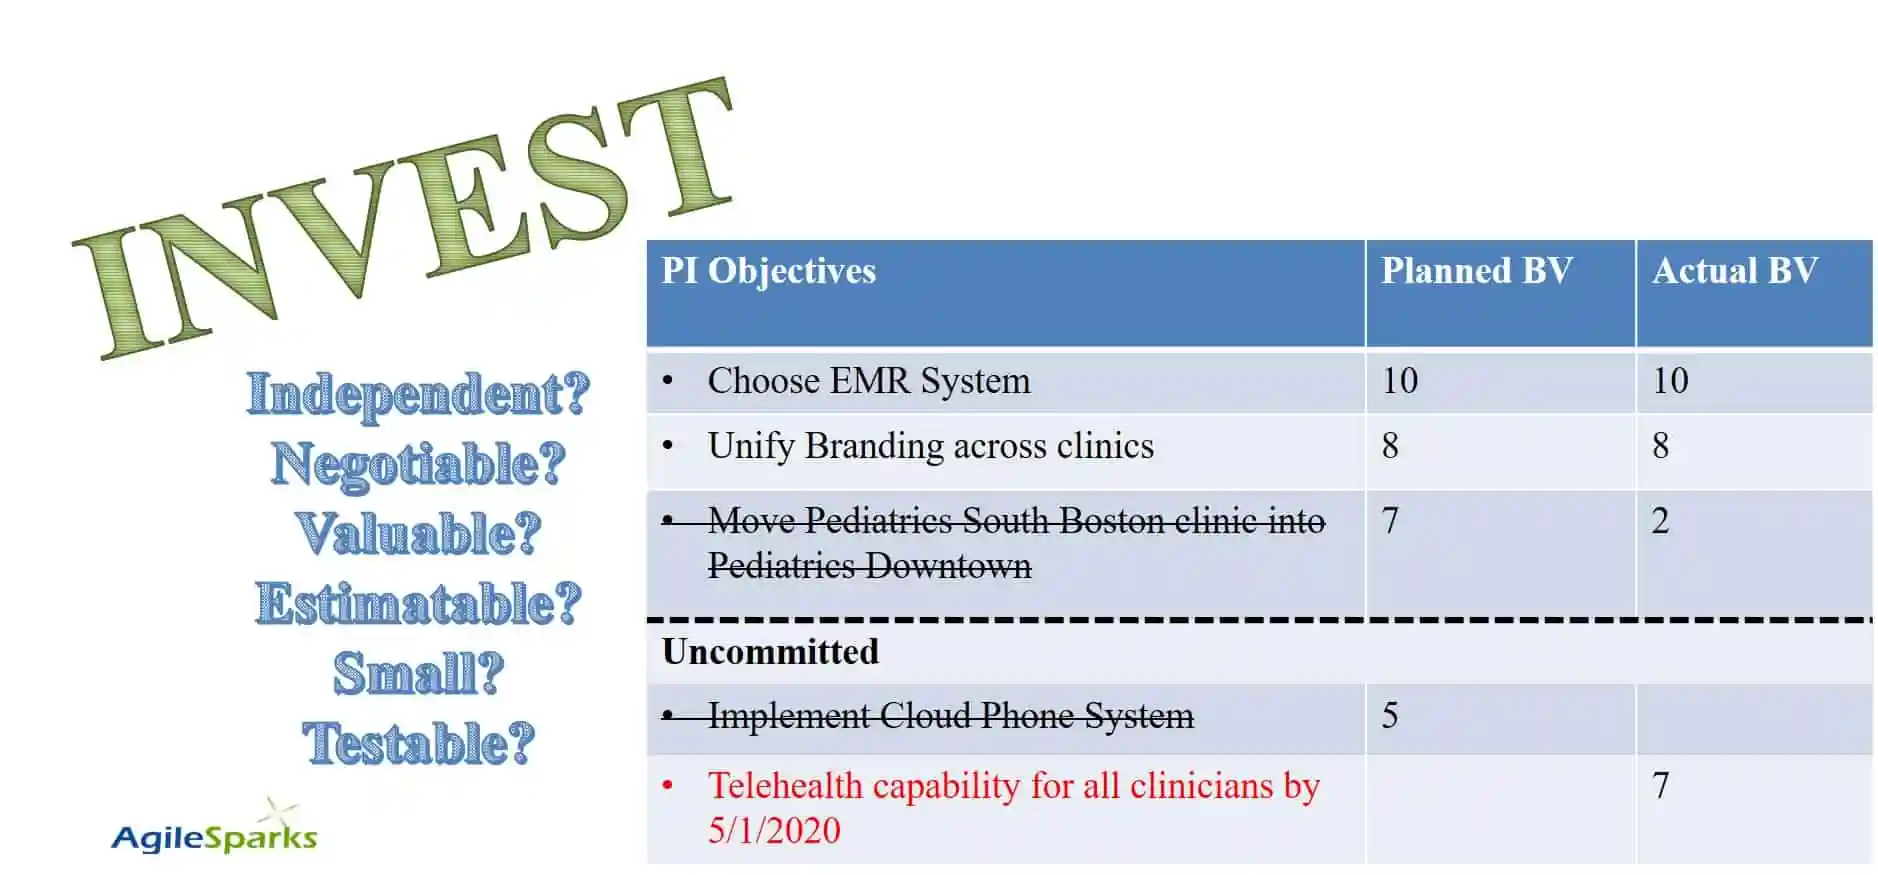 INVEST criteria for PI Objectives